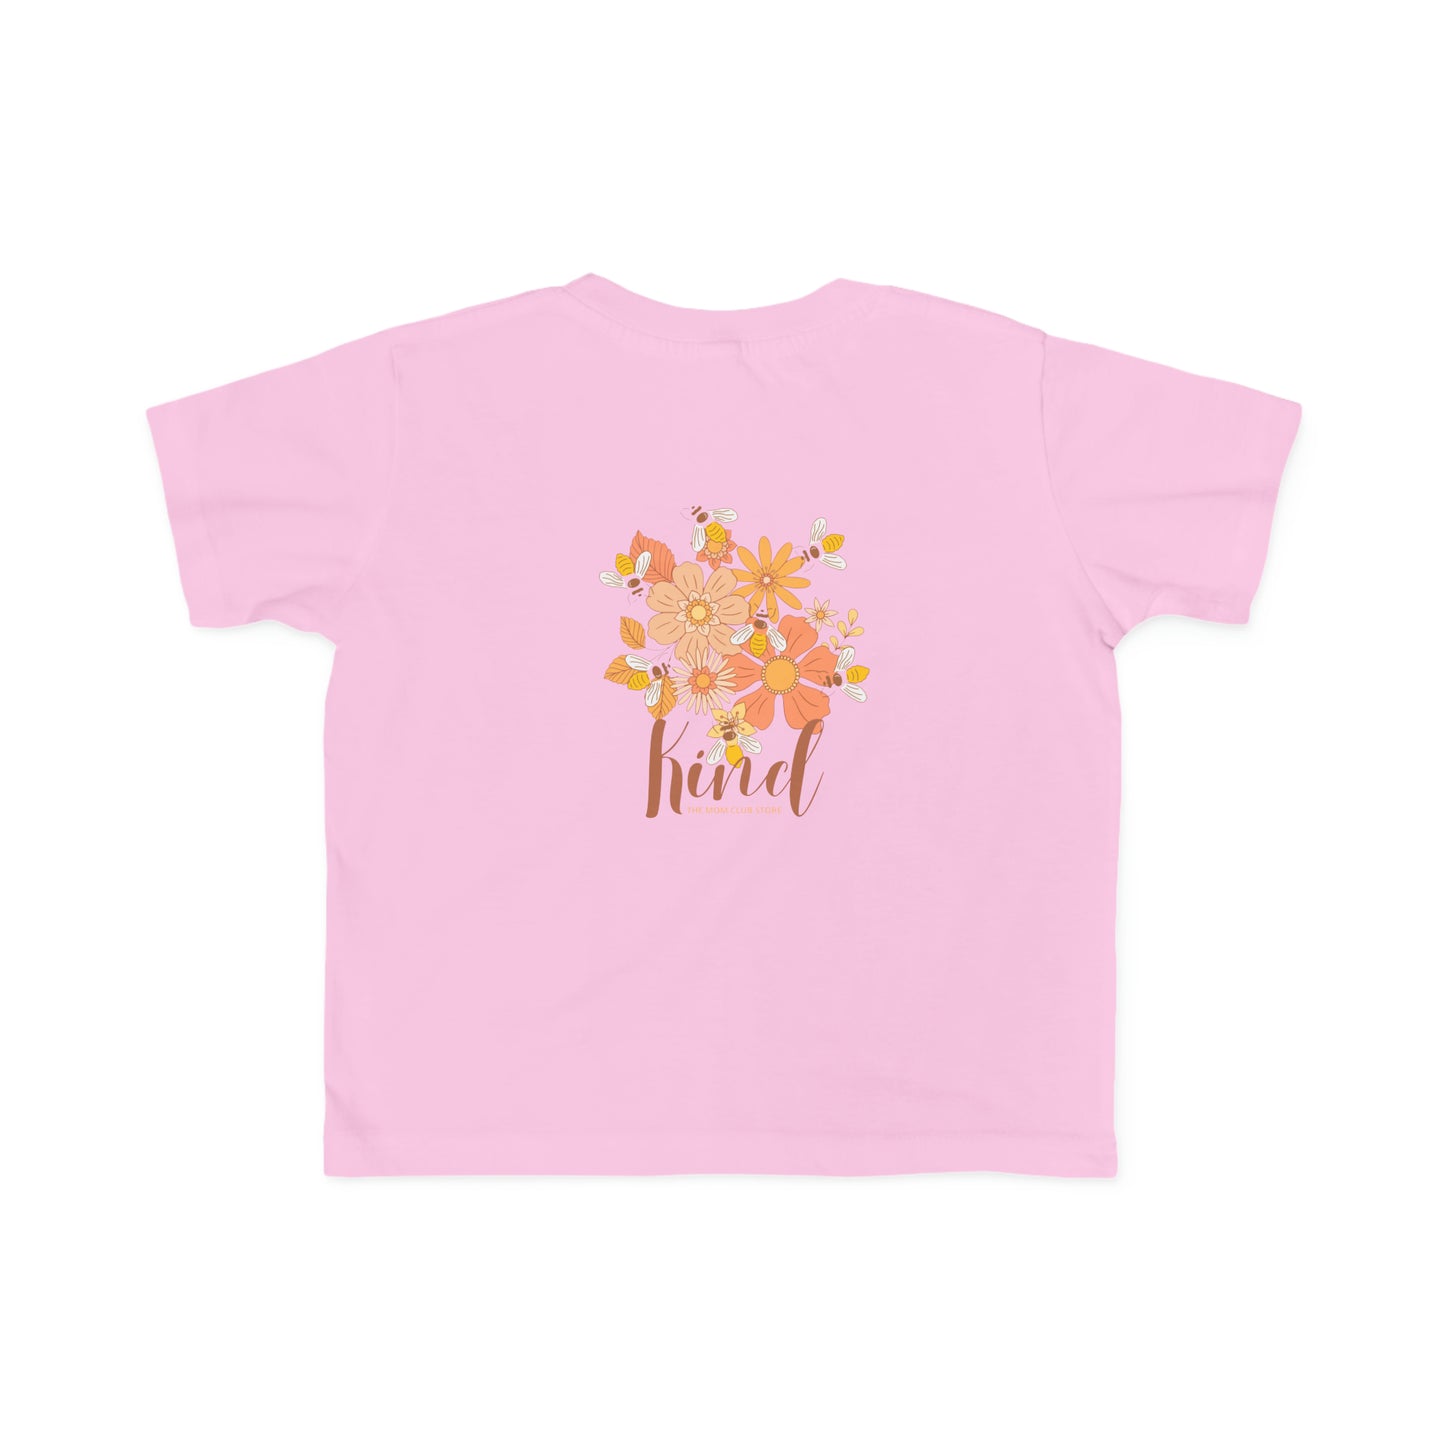 BEE KIND unisex print short-sleeve t-shirt for toddlers